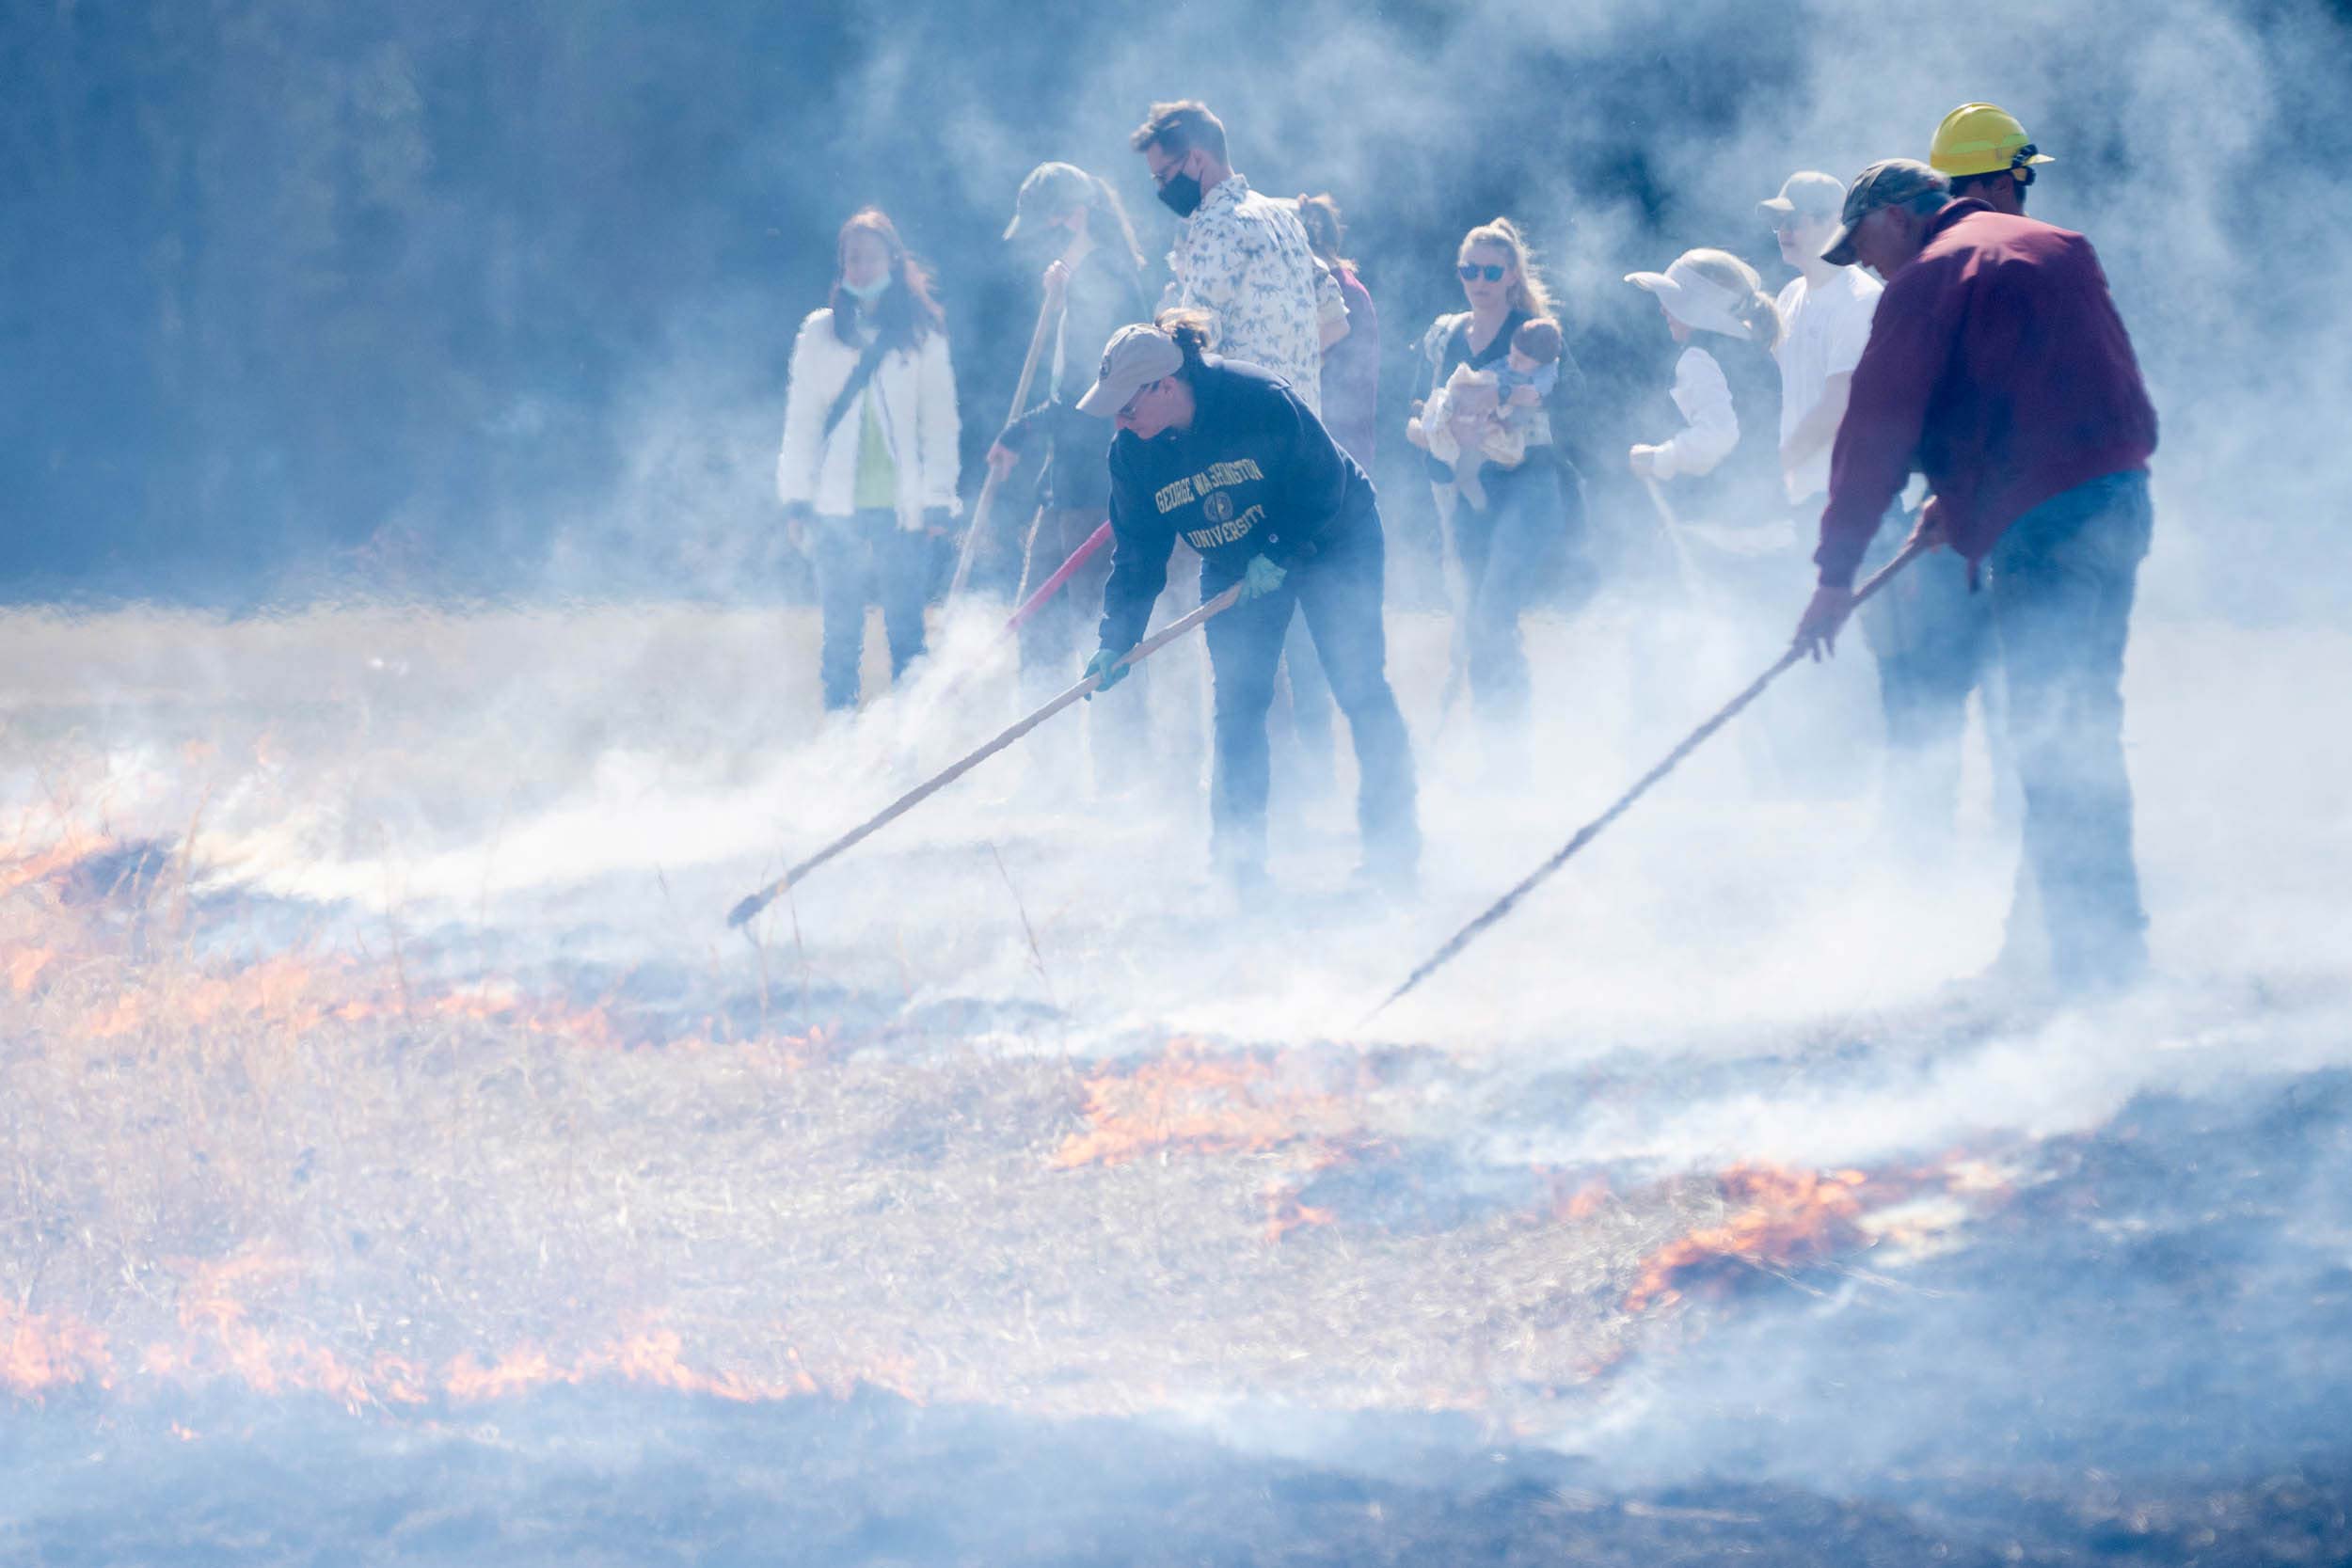 Two people with hoses spray the edge of a fire, while a crowd of people look on through a smoky haze